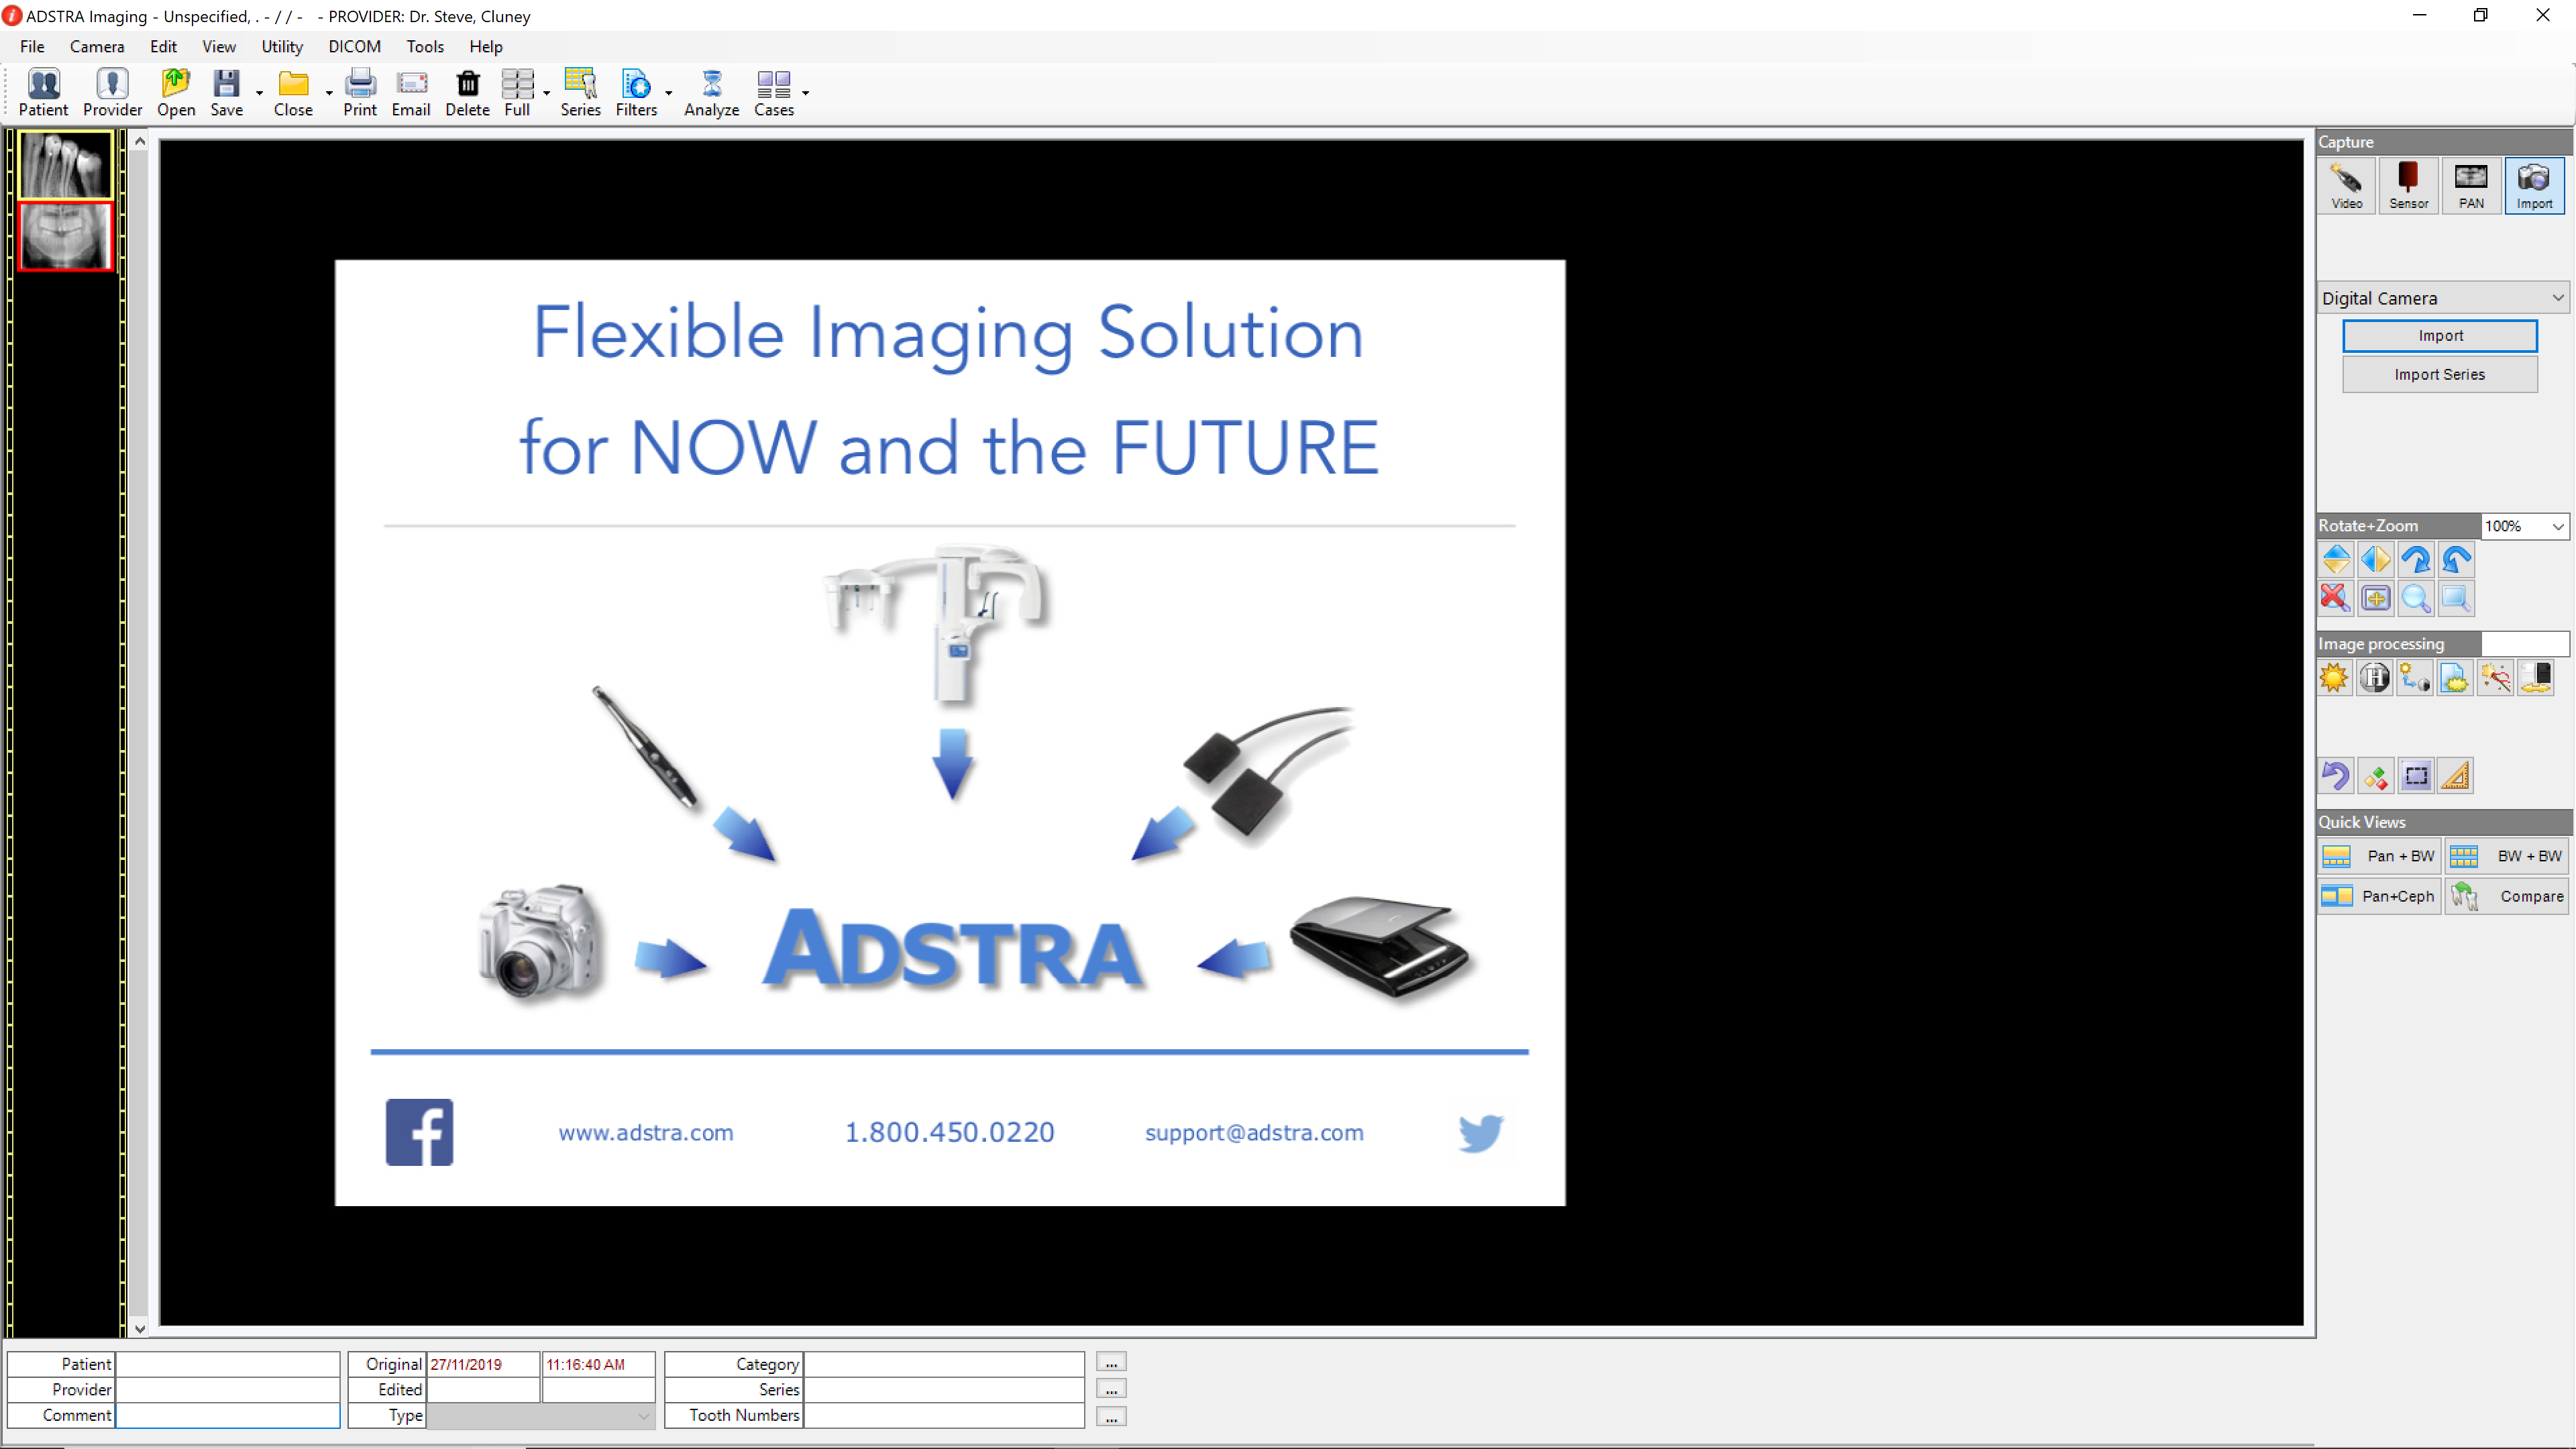 ADSTRA Dental Software Software - Attach notes to side-by-side dental x-rays using annotation tools included within ADSTRA Imaging